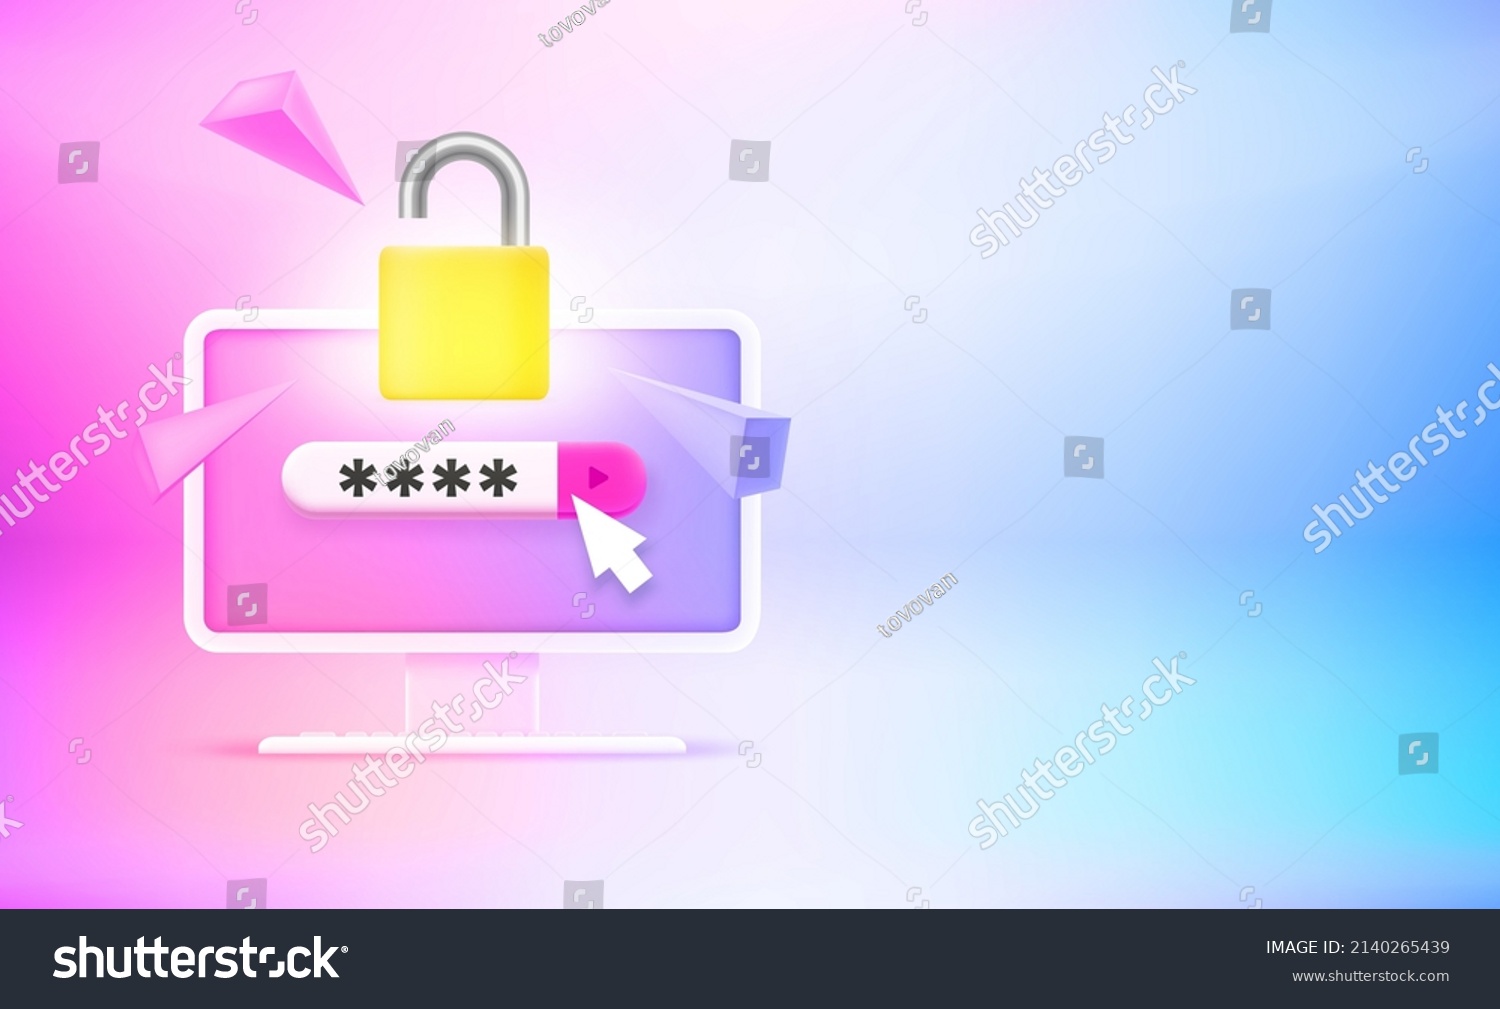 SVG of Inputting password to unlock the computer. 3d vector illustration svg